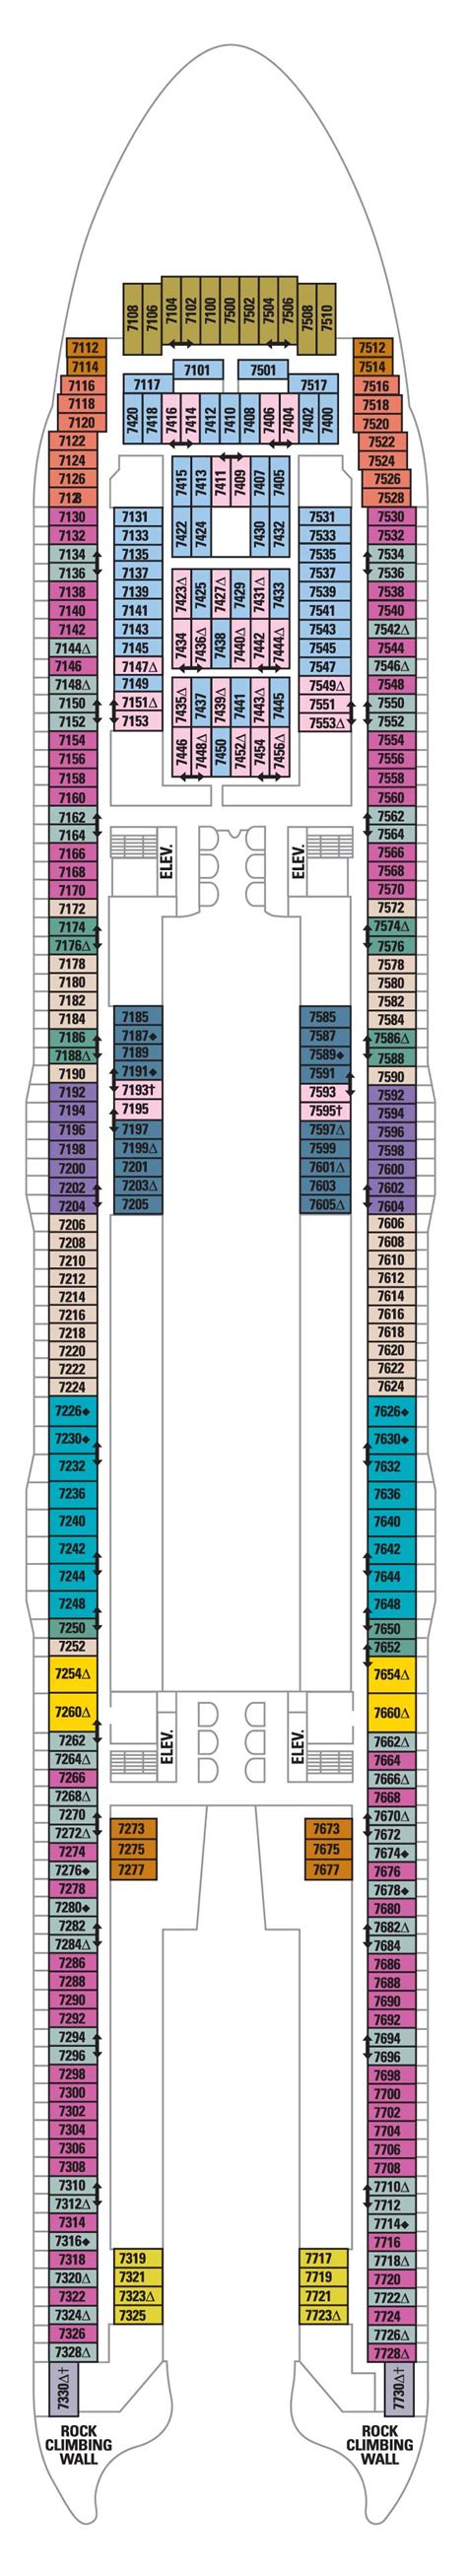 %s deck plan find your cabin here on the ship and cabin plan overview of inside and balcony cabins ship's plan allure of the seas. Deck 7 - Allure of the Seas Deck Plans | Royal Caribbean Blog